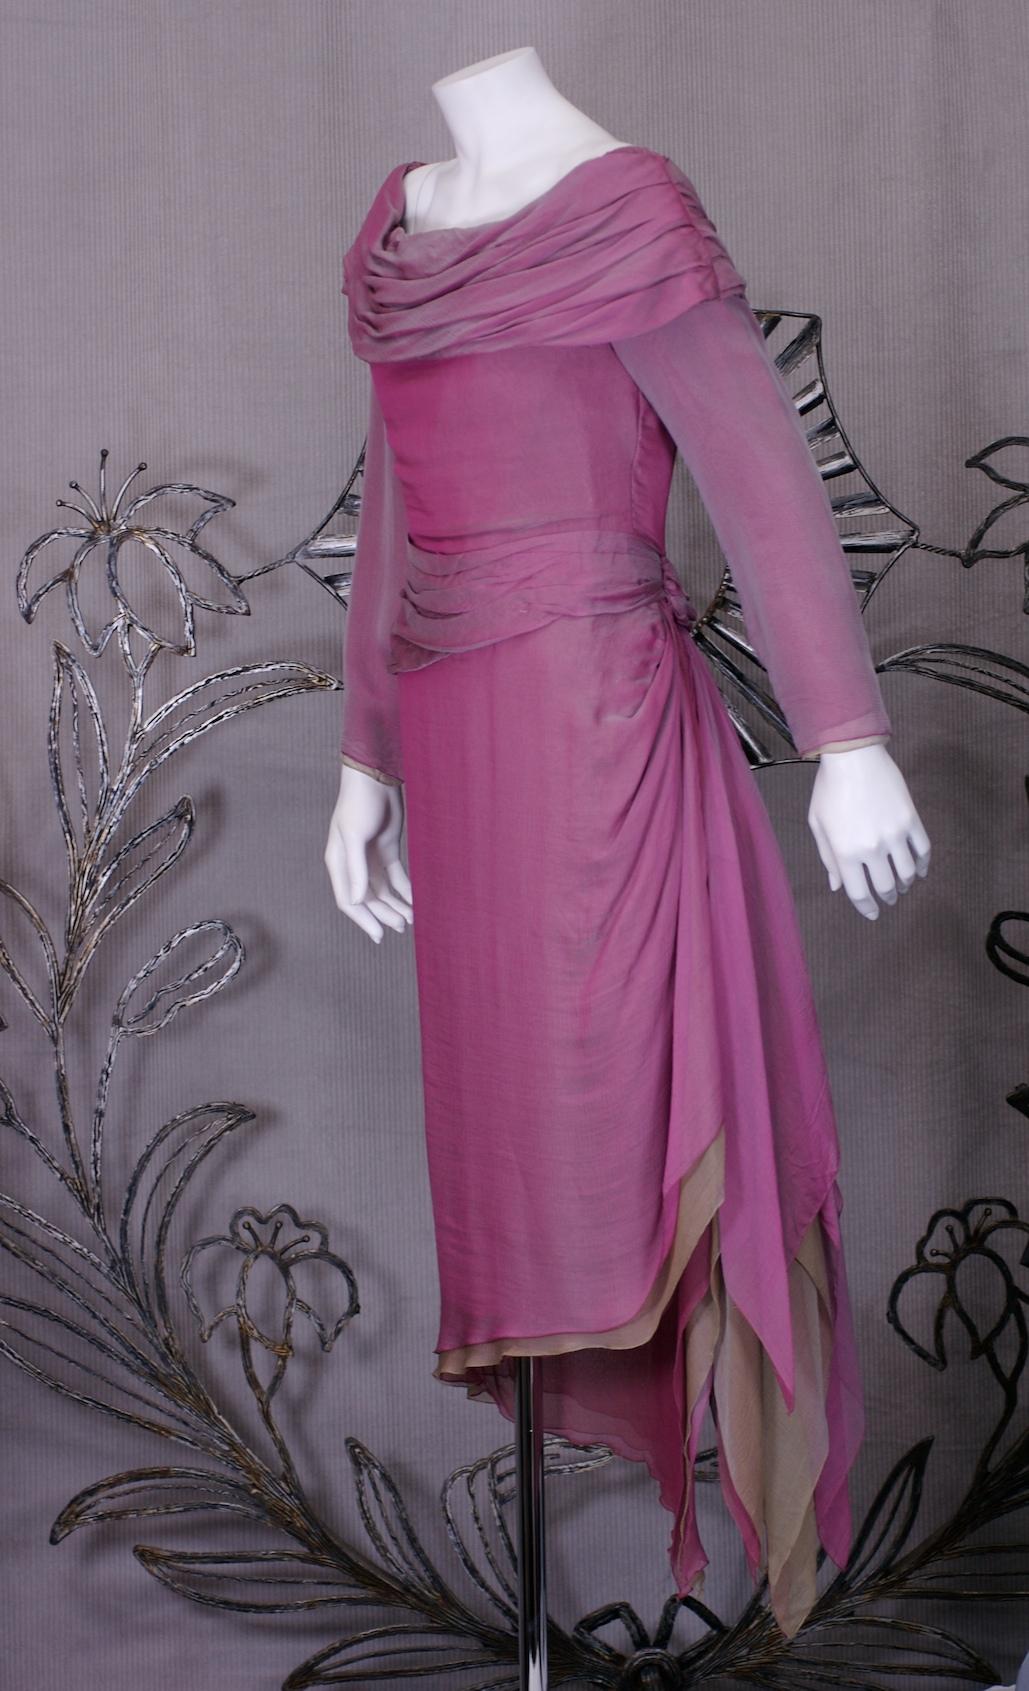 Lovely and elegant Paul Louis Orrier Cocktail Dress made with 2 layers of silk chiffon, the first in changeant rasberry overlaid on top of a pale coffee chiffon. Draped off the shoulder neckline with fitted bodice, draped waist and long sleeves. The